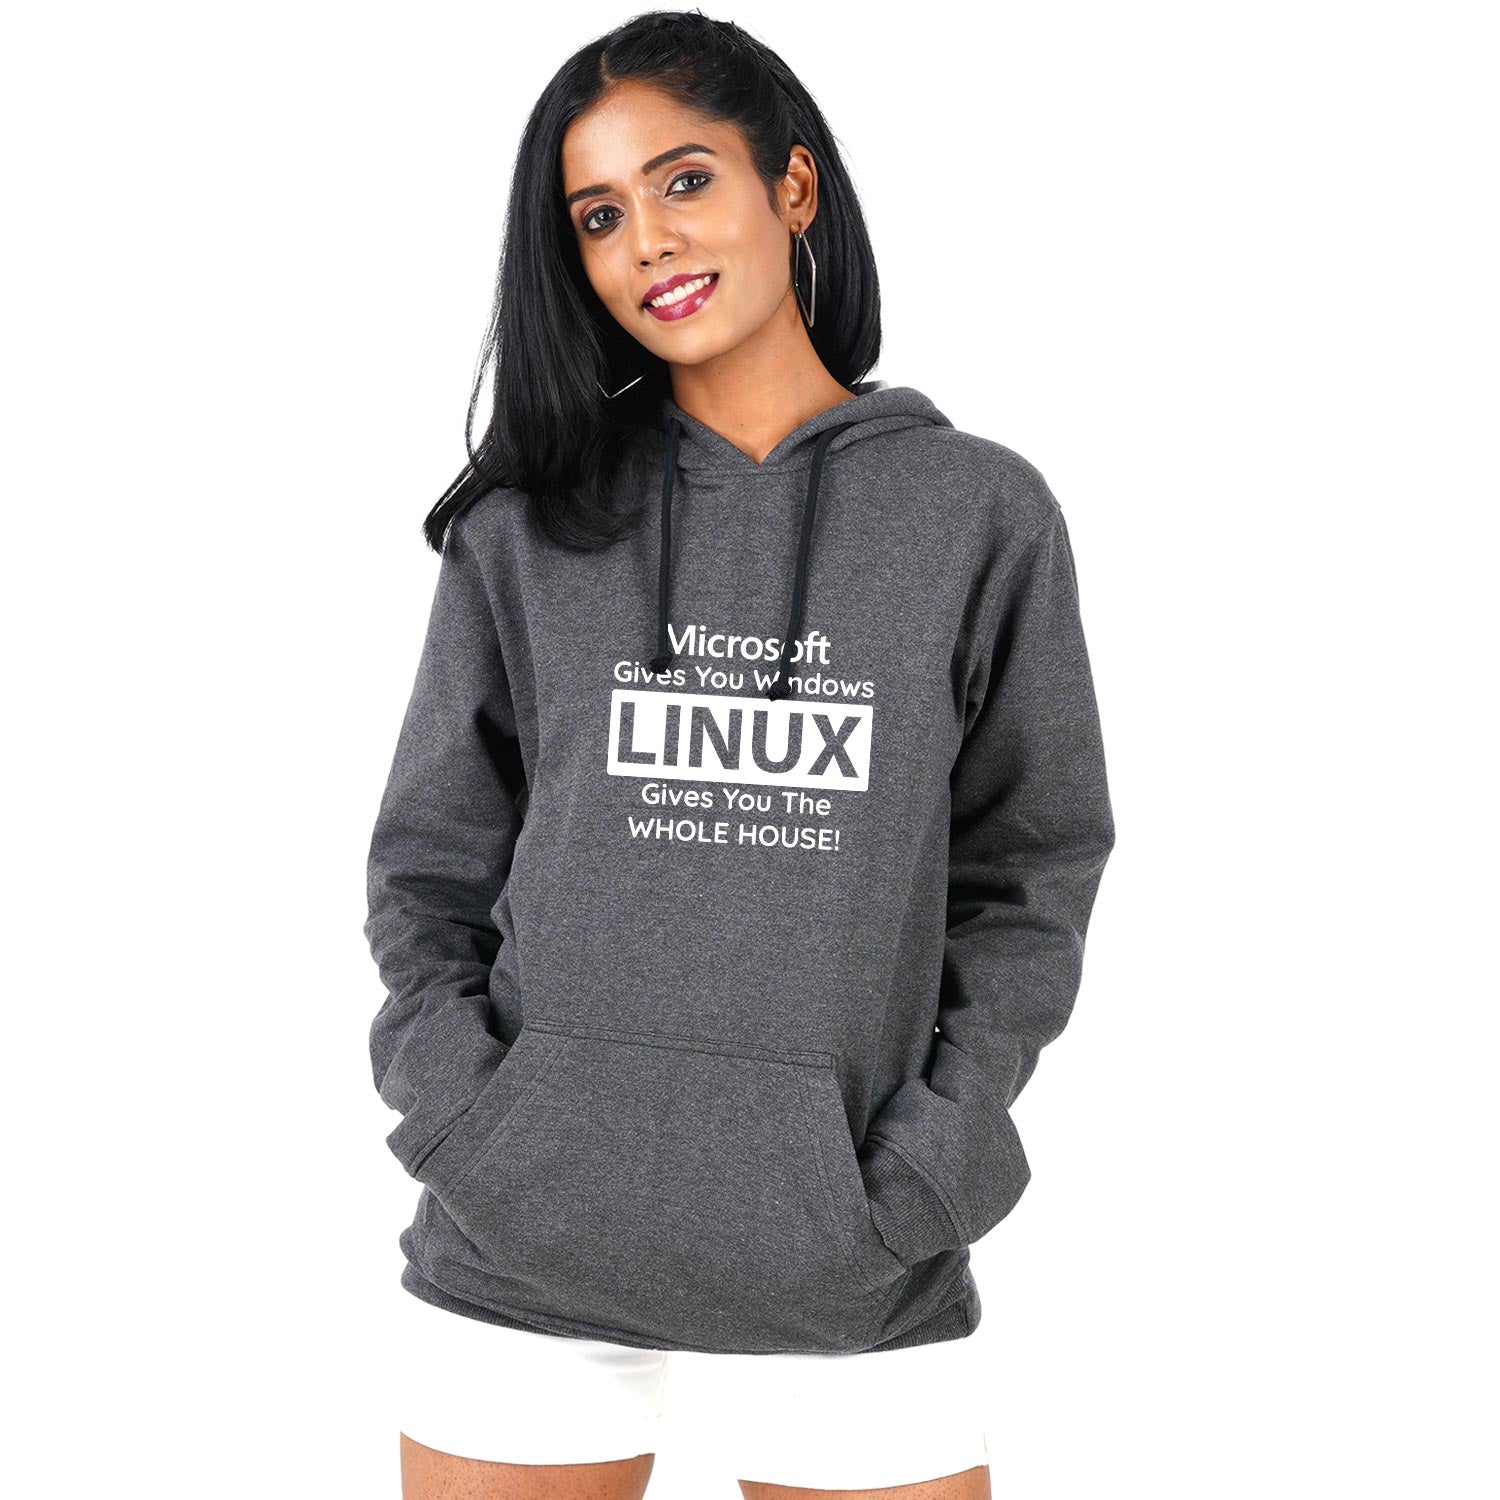 Microsoft Gives You Windows Linux Gives You Whole House Unisex Hoodie